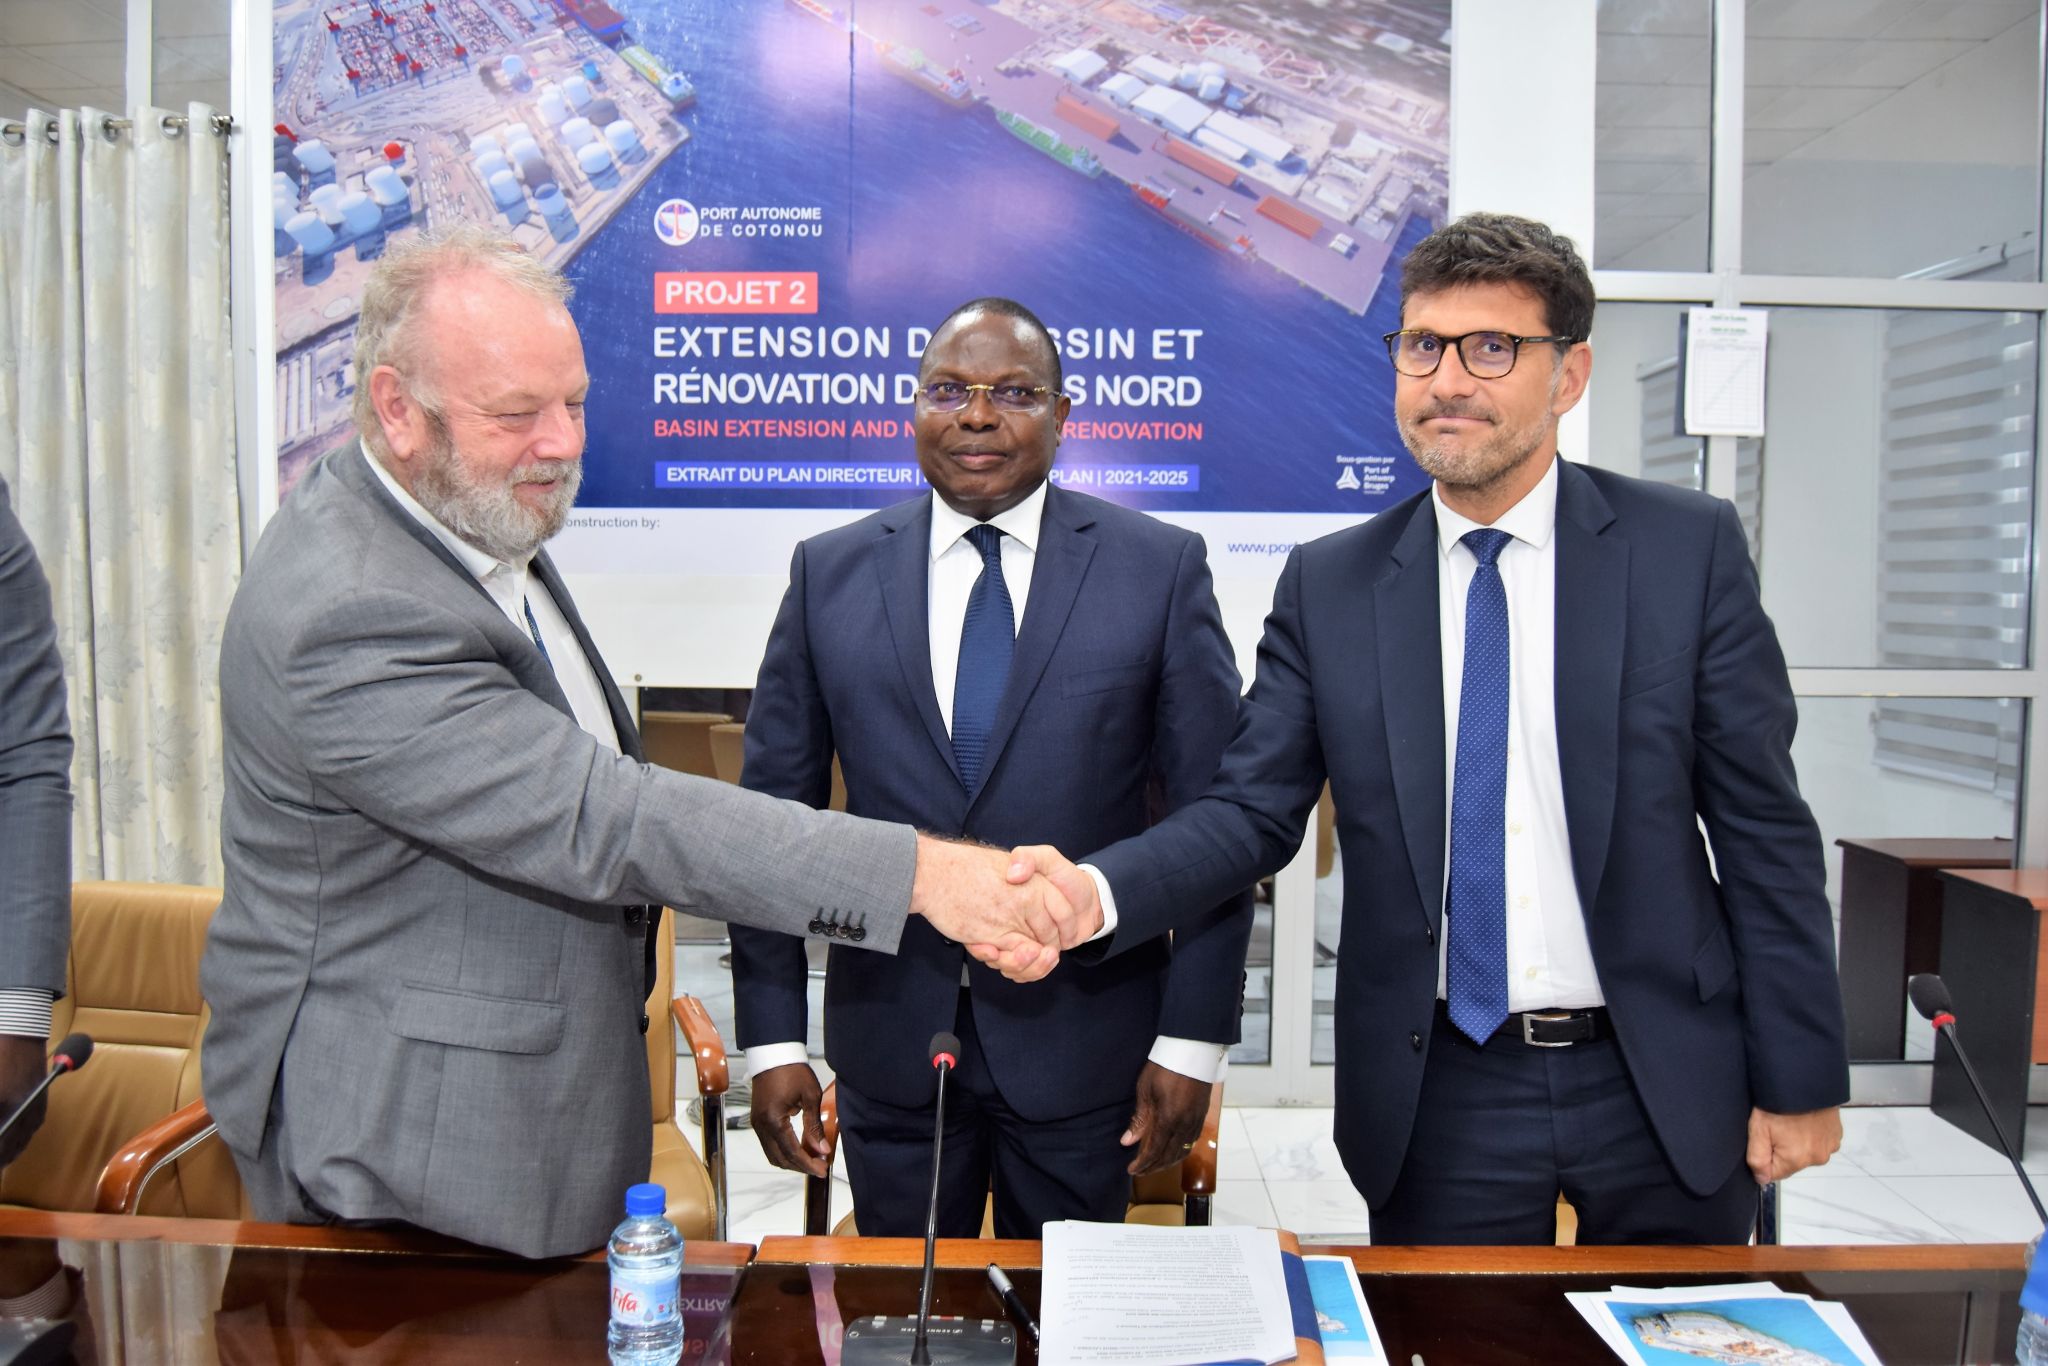 Signing of the contract for the extension of the basin and renovation of the northern quays of the Port of Cotonou